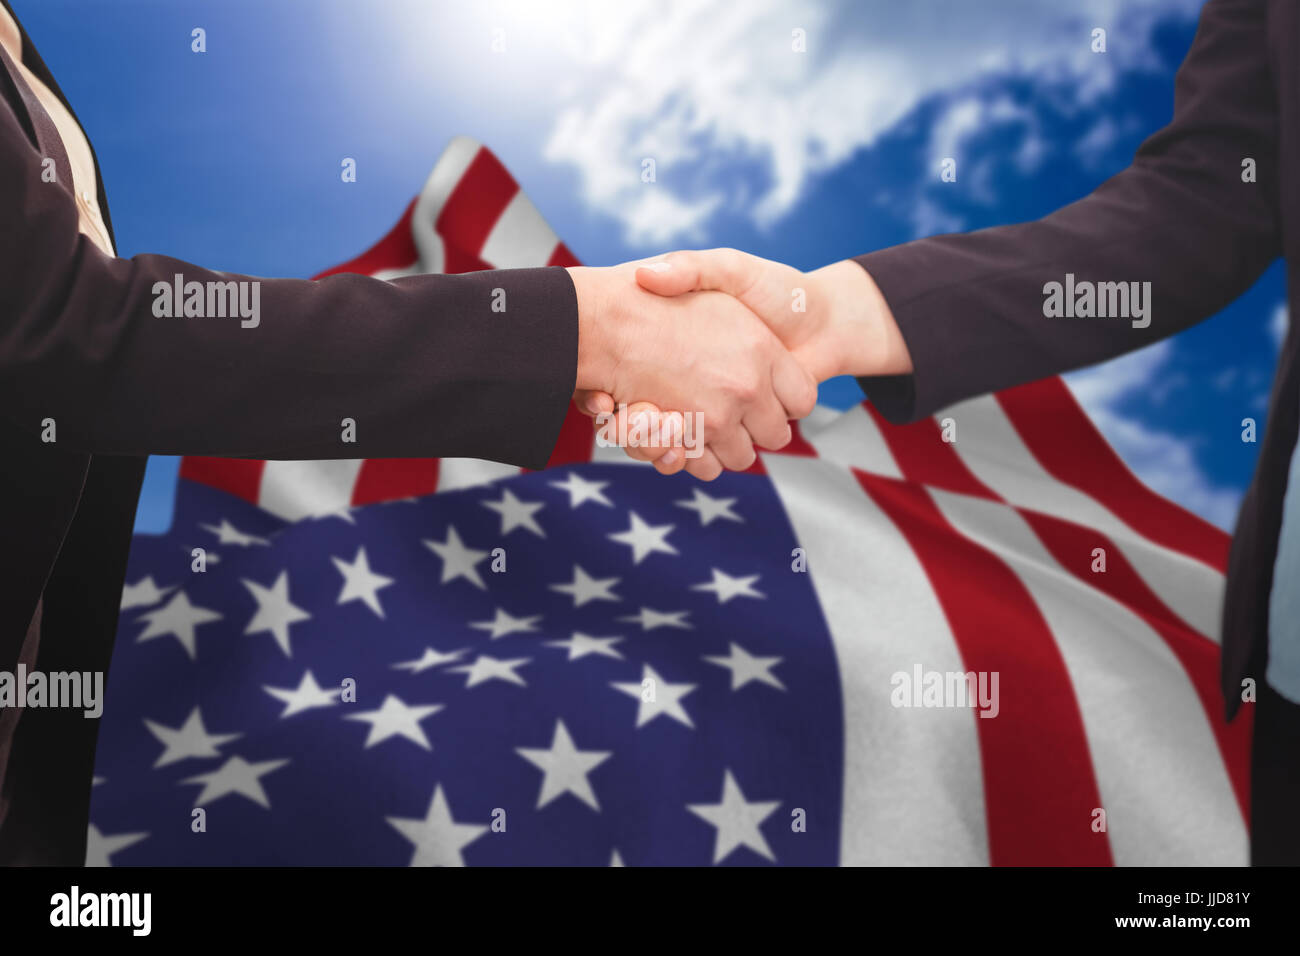 Businessman shaking hands with colleague against blue sky Stock Photo